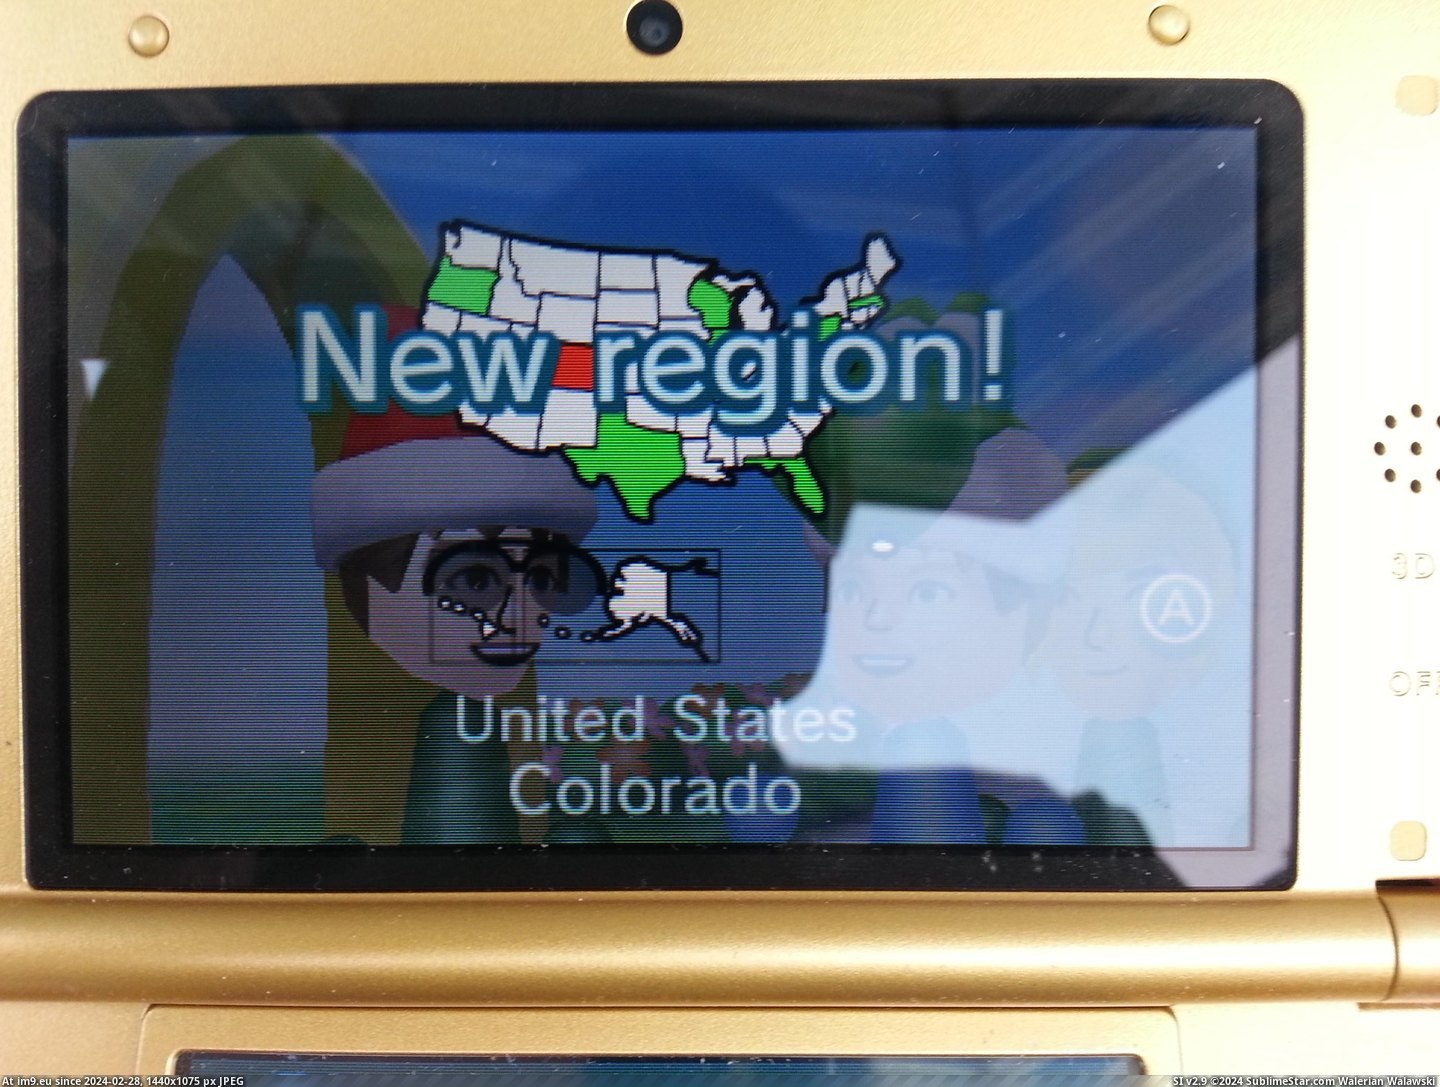 #Gaming #World #Carry #Spotpass #Disney #3ds [Gaming] This is what happens when you carry around your 3DS and spotpass in Disney World 19 Pic. (Image of album My r/GAMING favs))